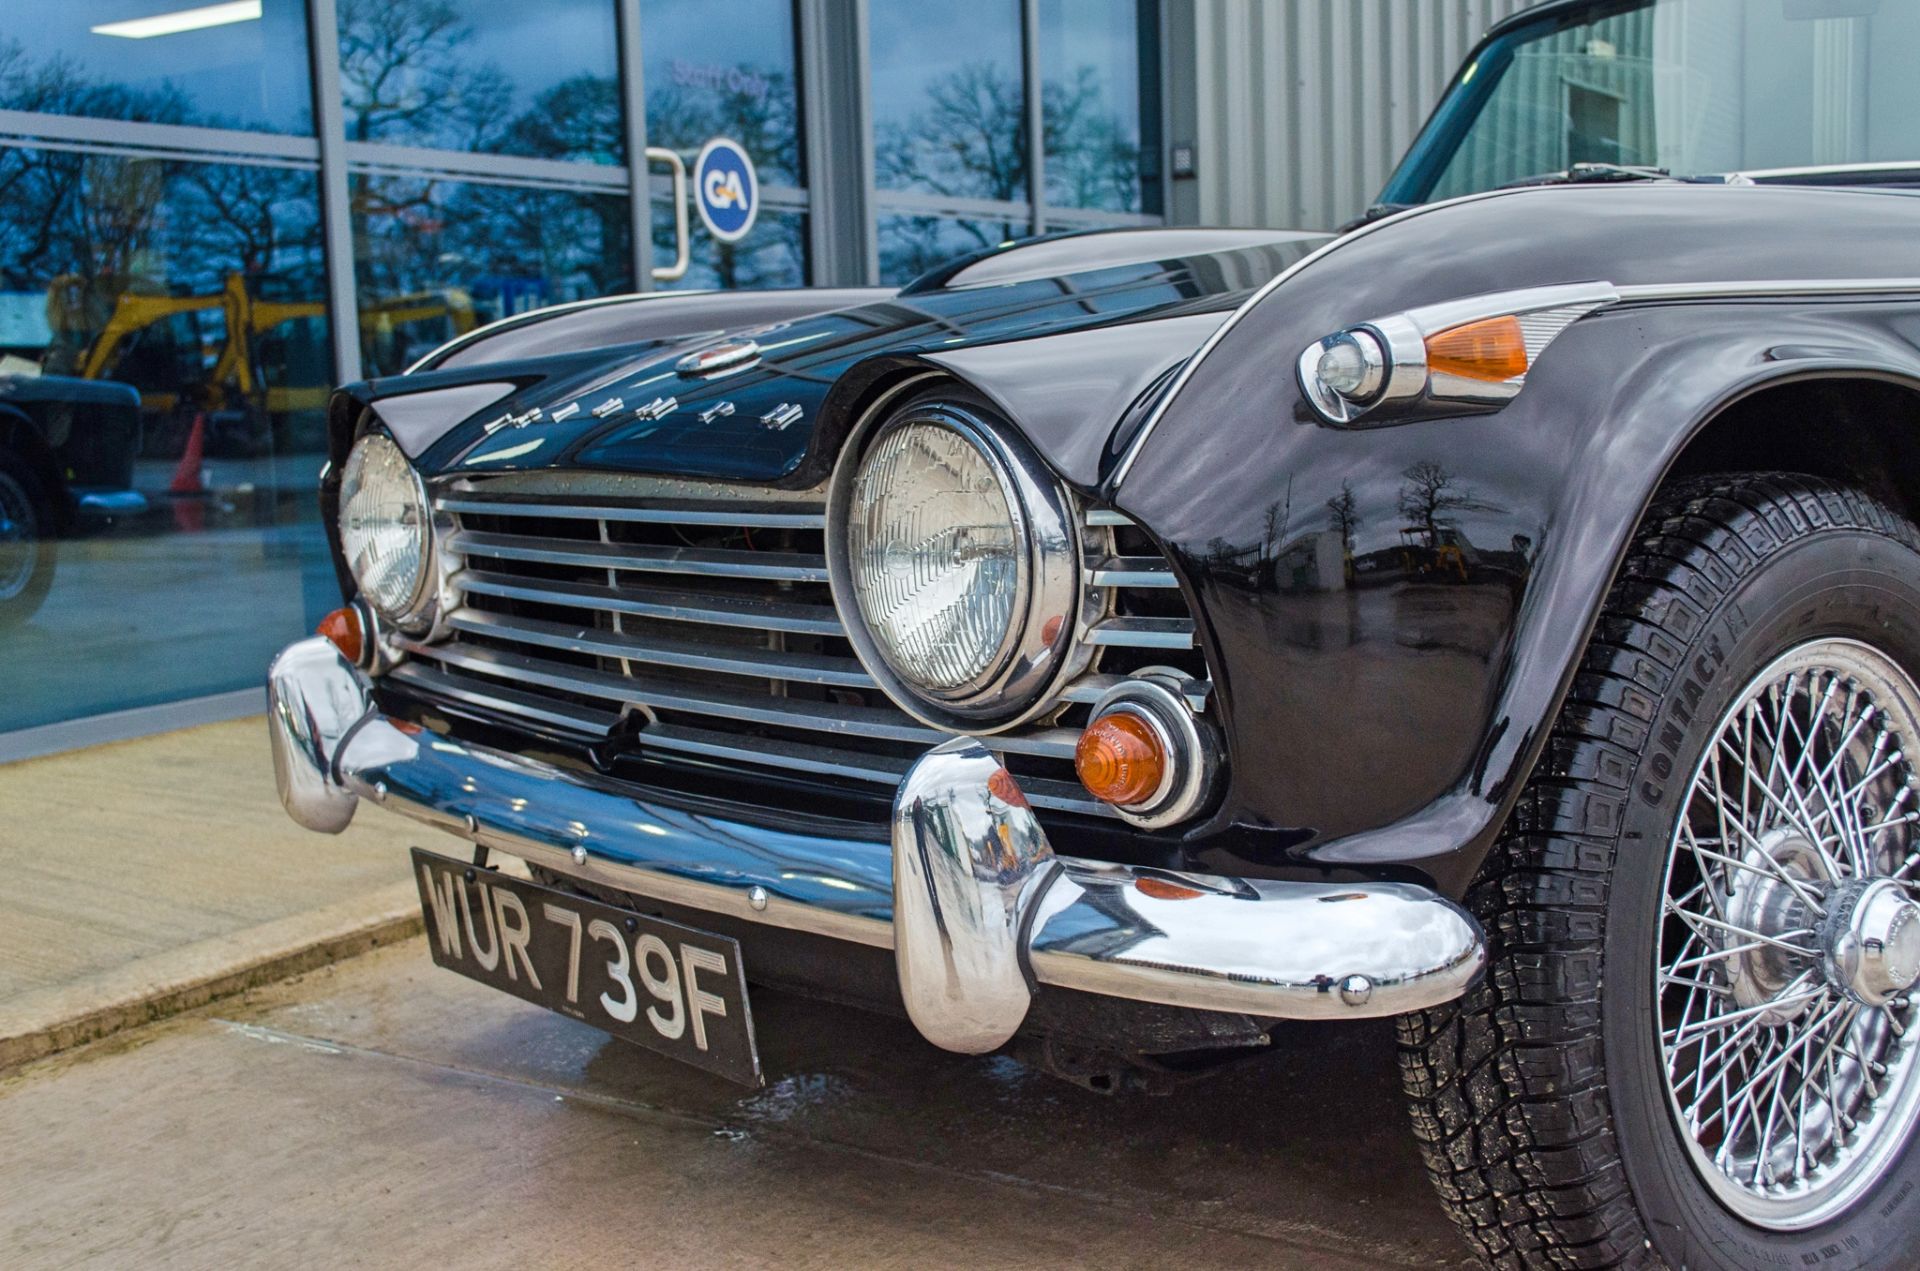 1967 Triumph TR4A IRS 2135cc convertible - Image 22 of 56